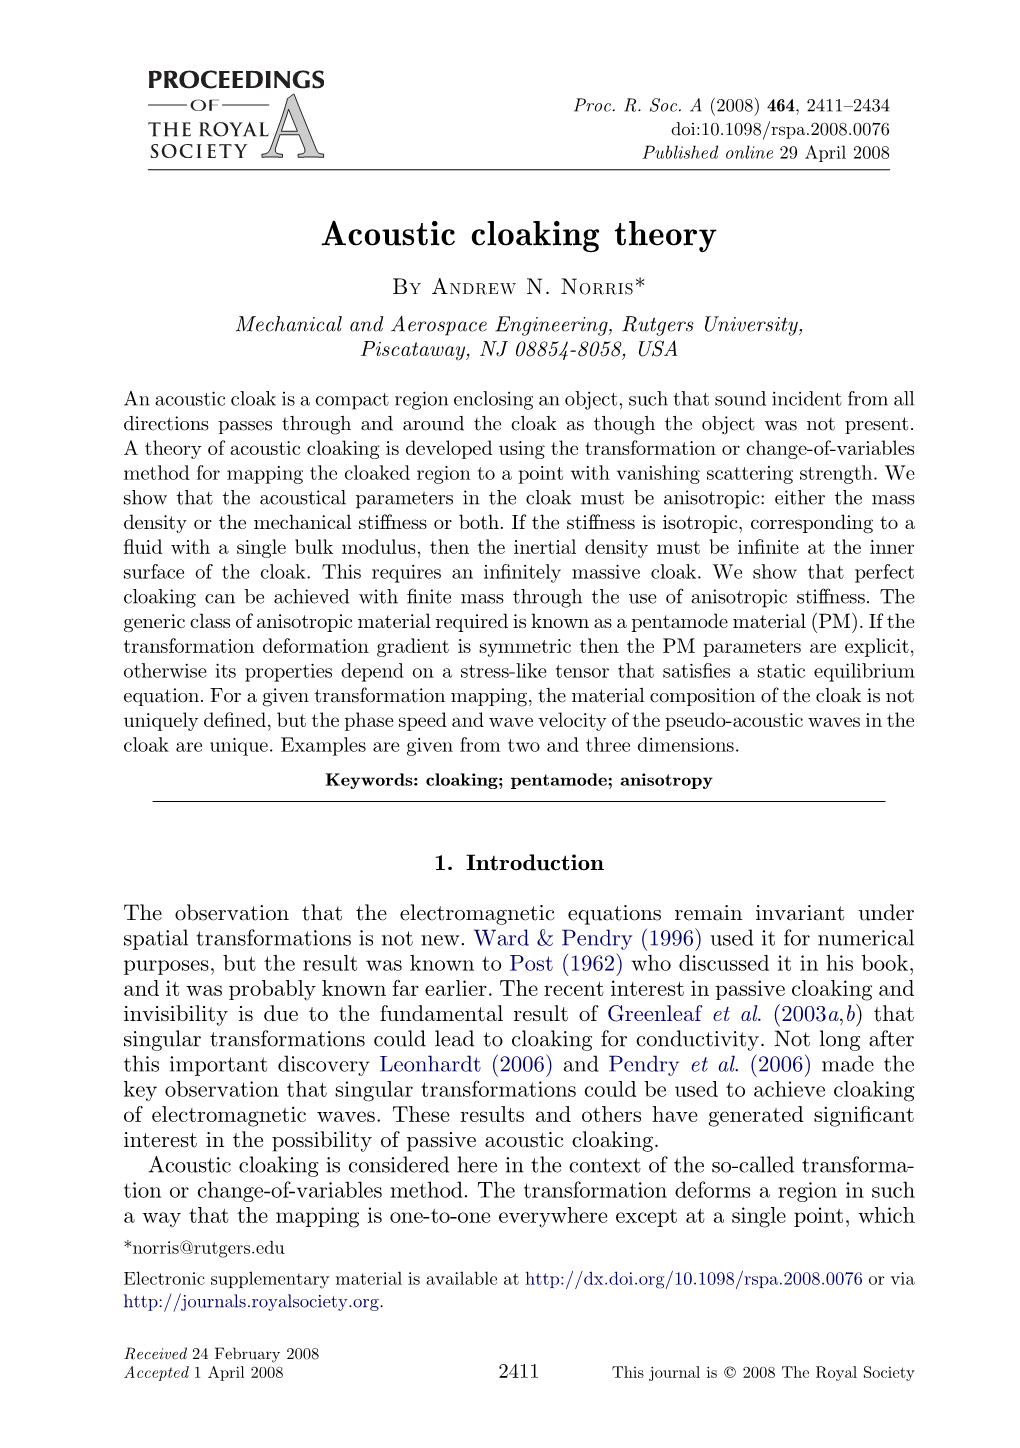 Acoustic Cloaking Theory